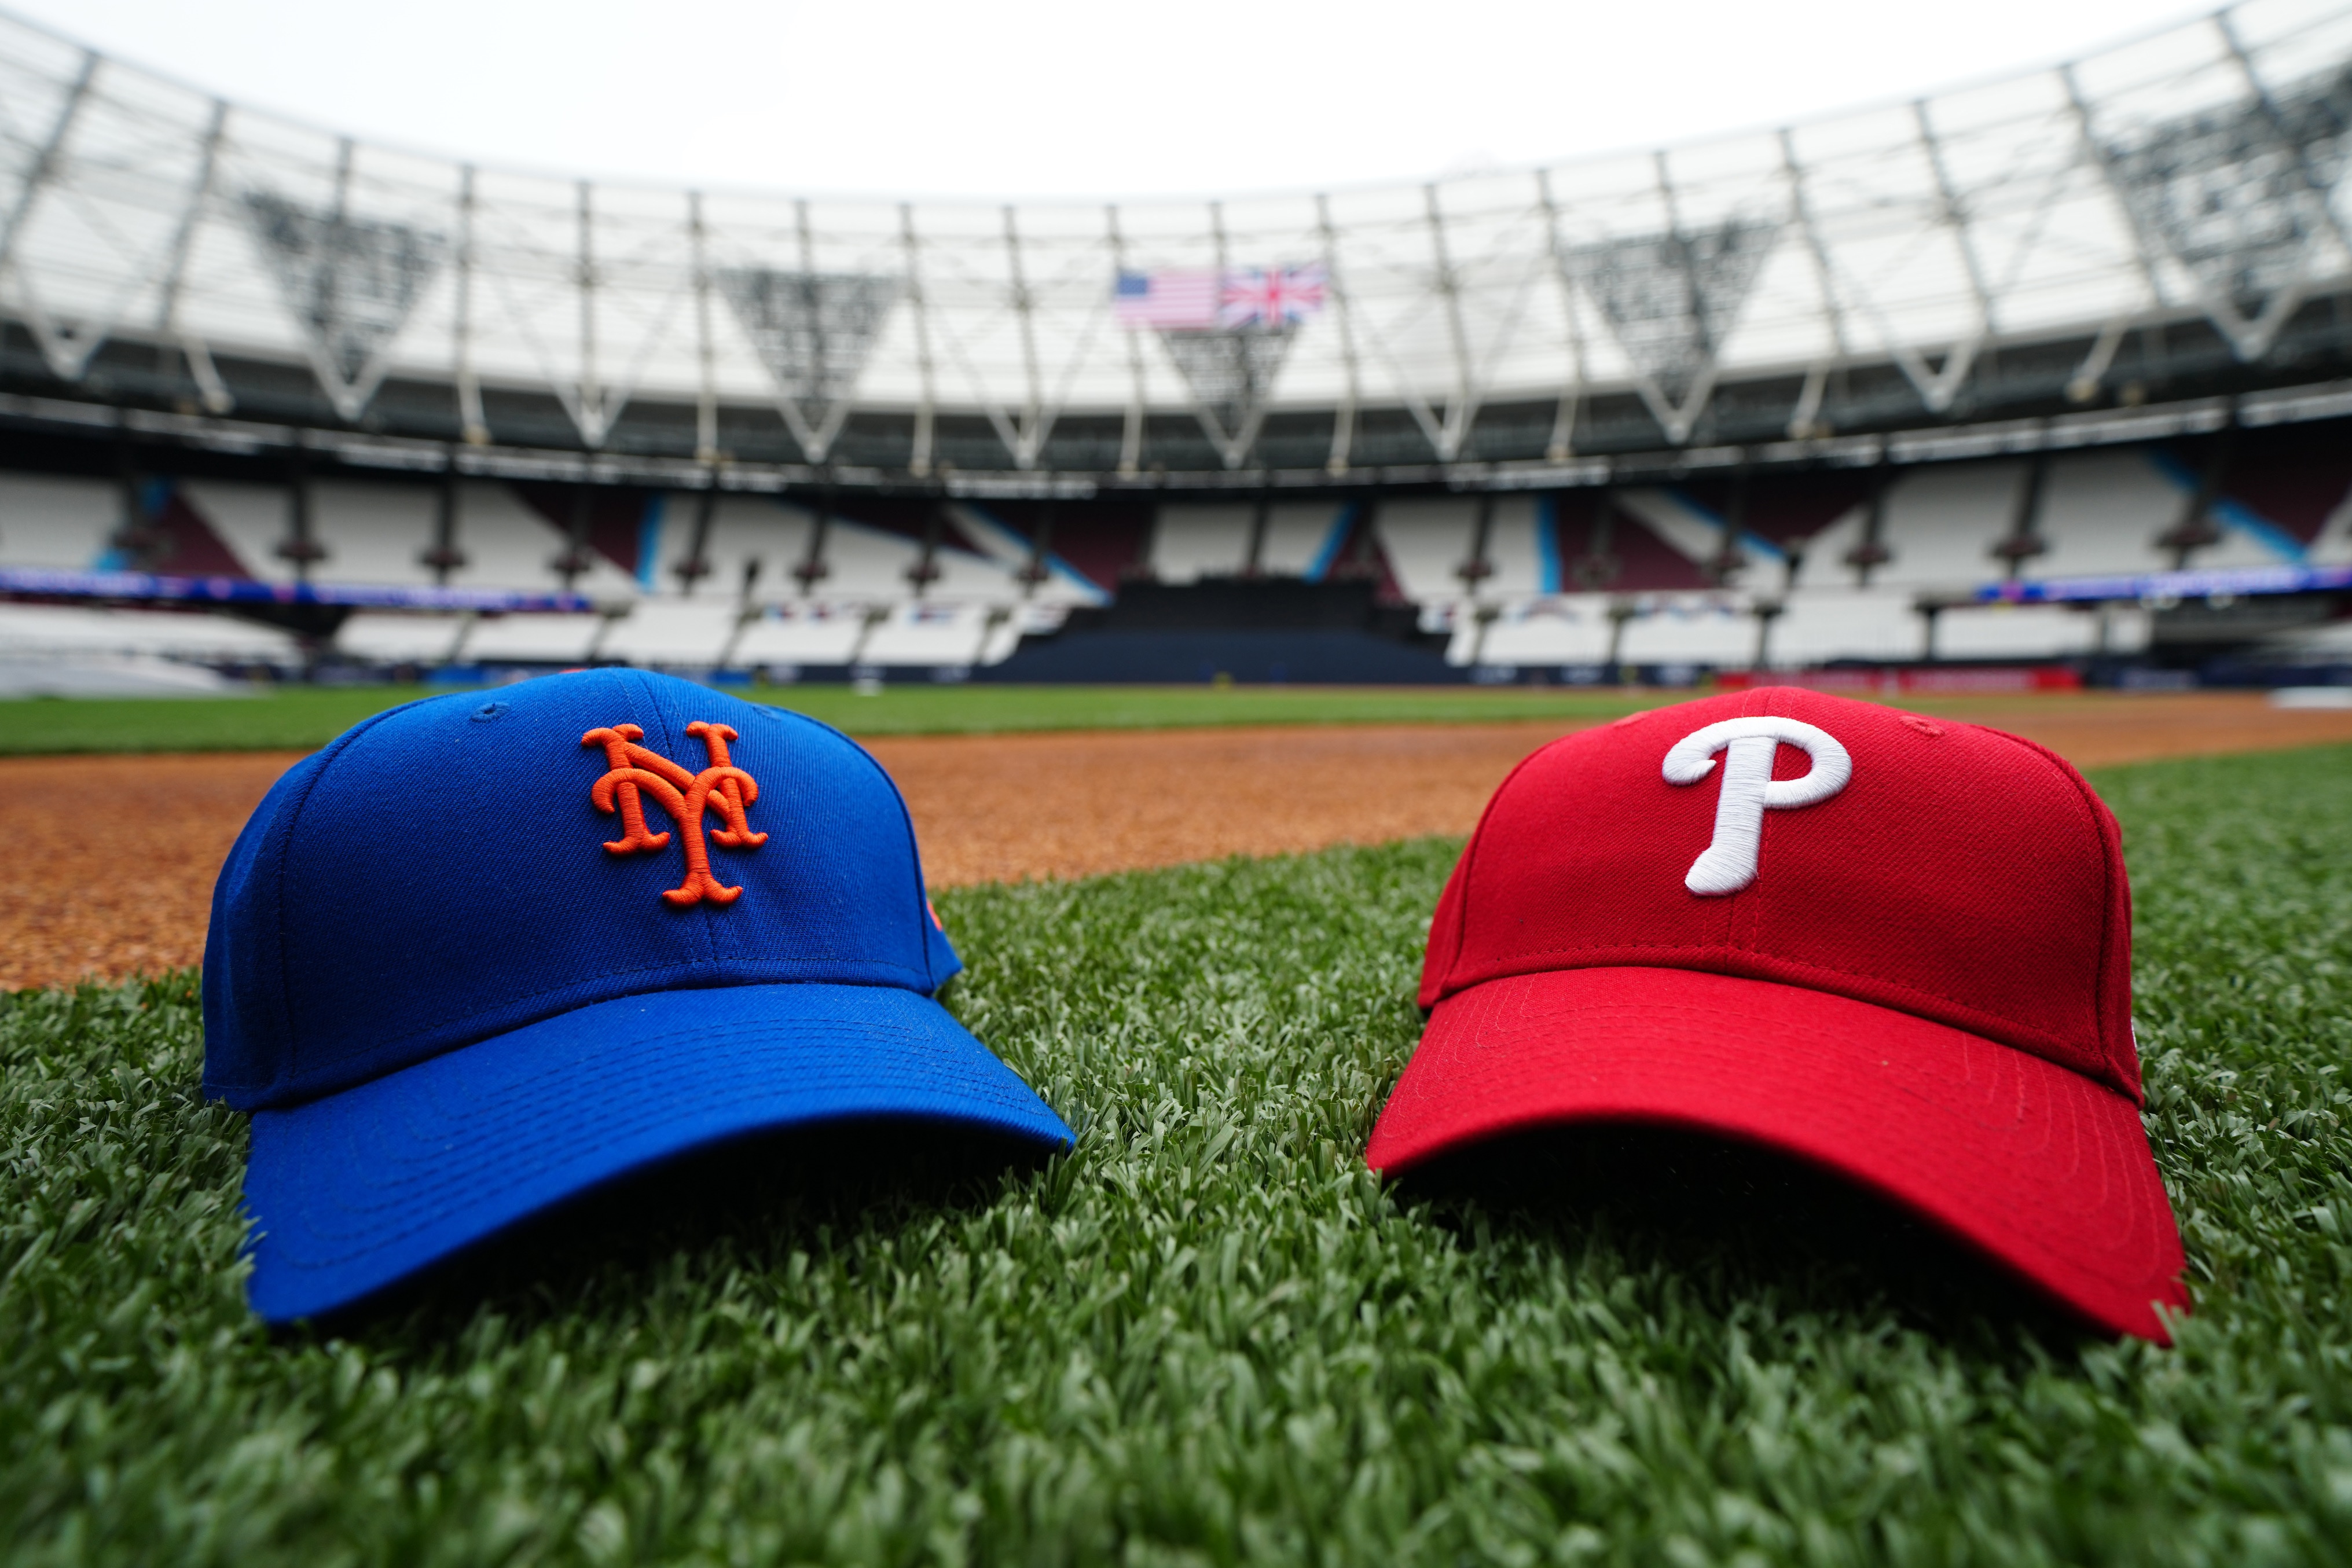 Major League Baseball is heading back to the UK for the London Series in June